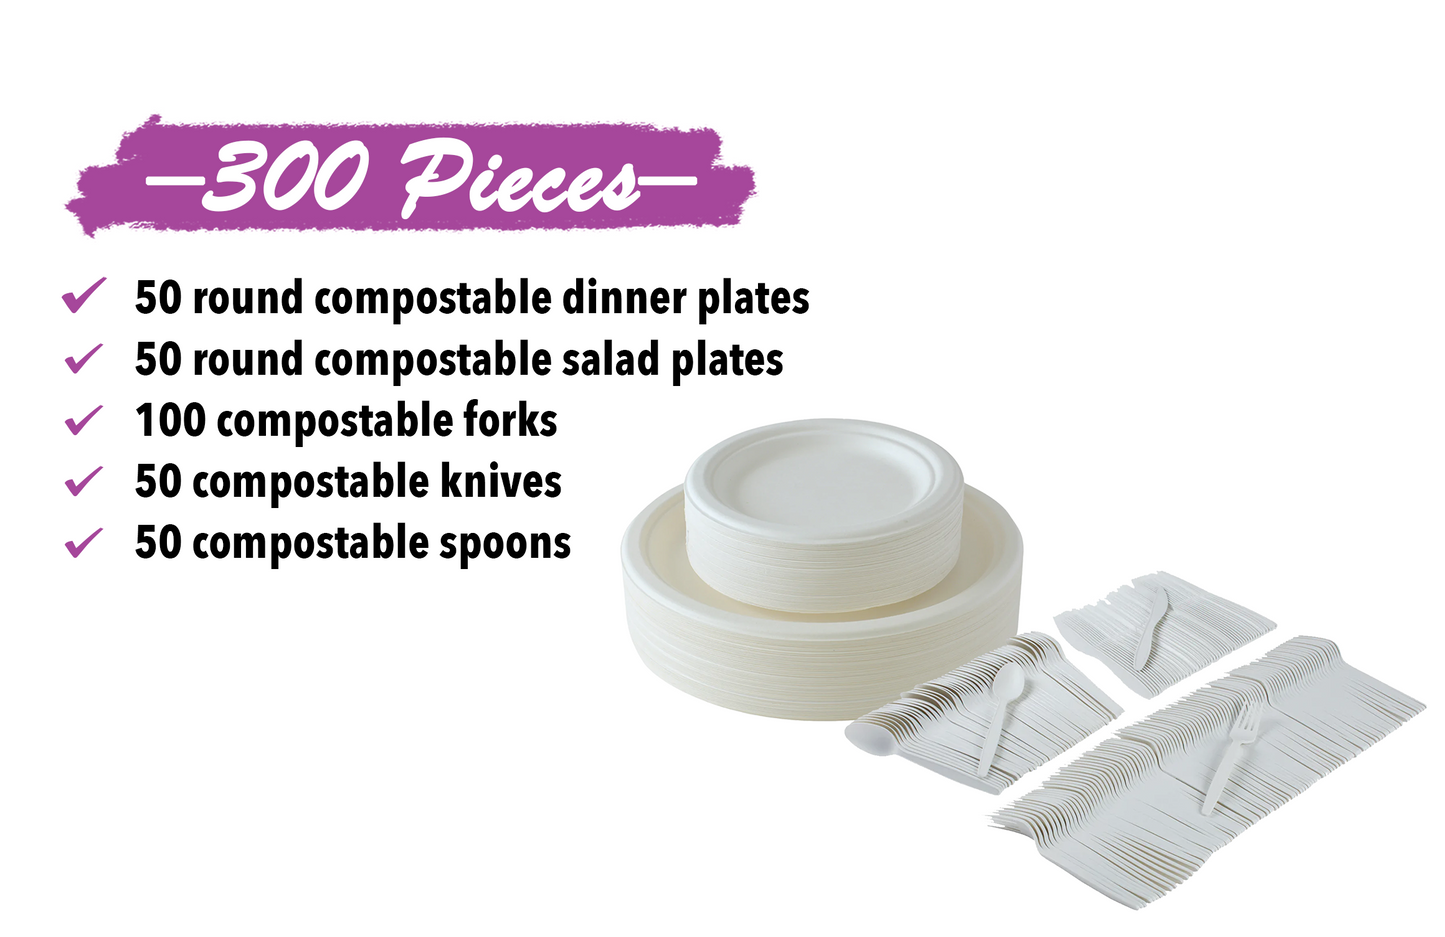 300-piece Compostable eco-friendly dinnerware set for 50 guests. Includes: 100 white round plates & 200 utensils